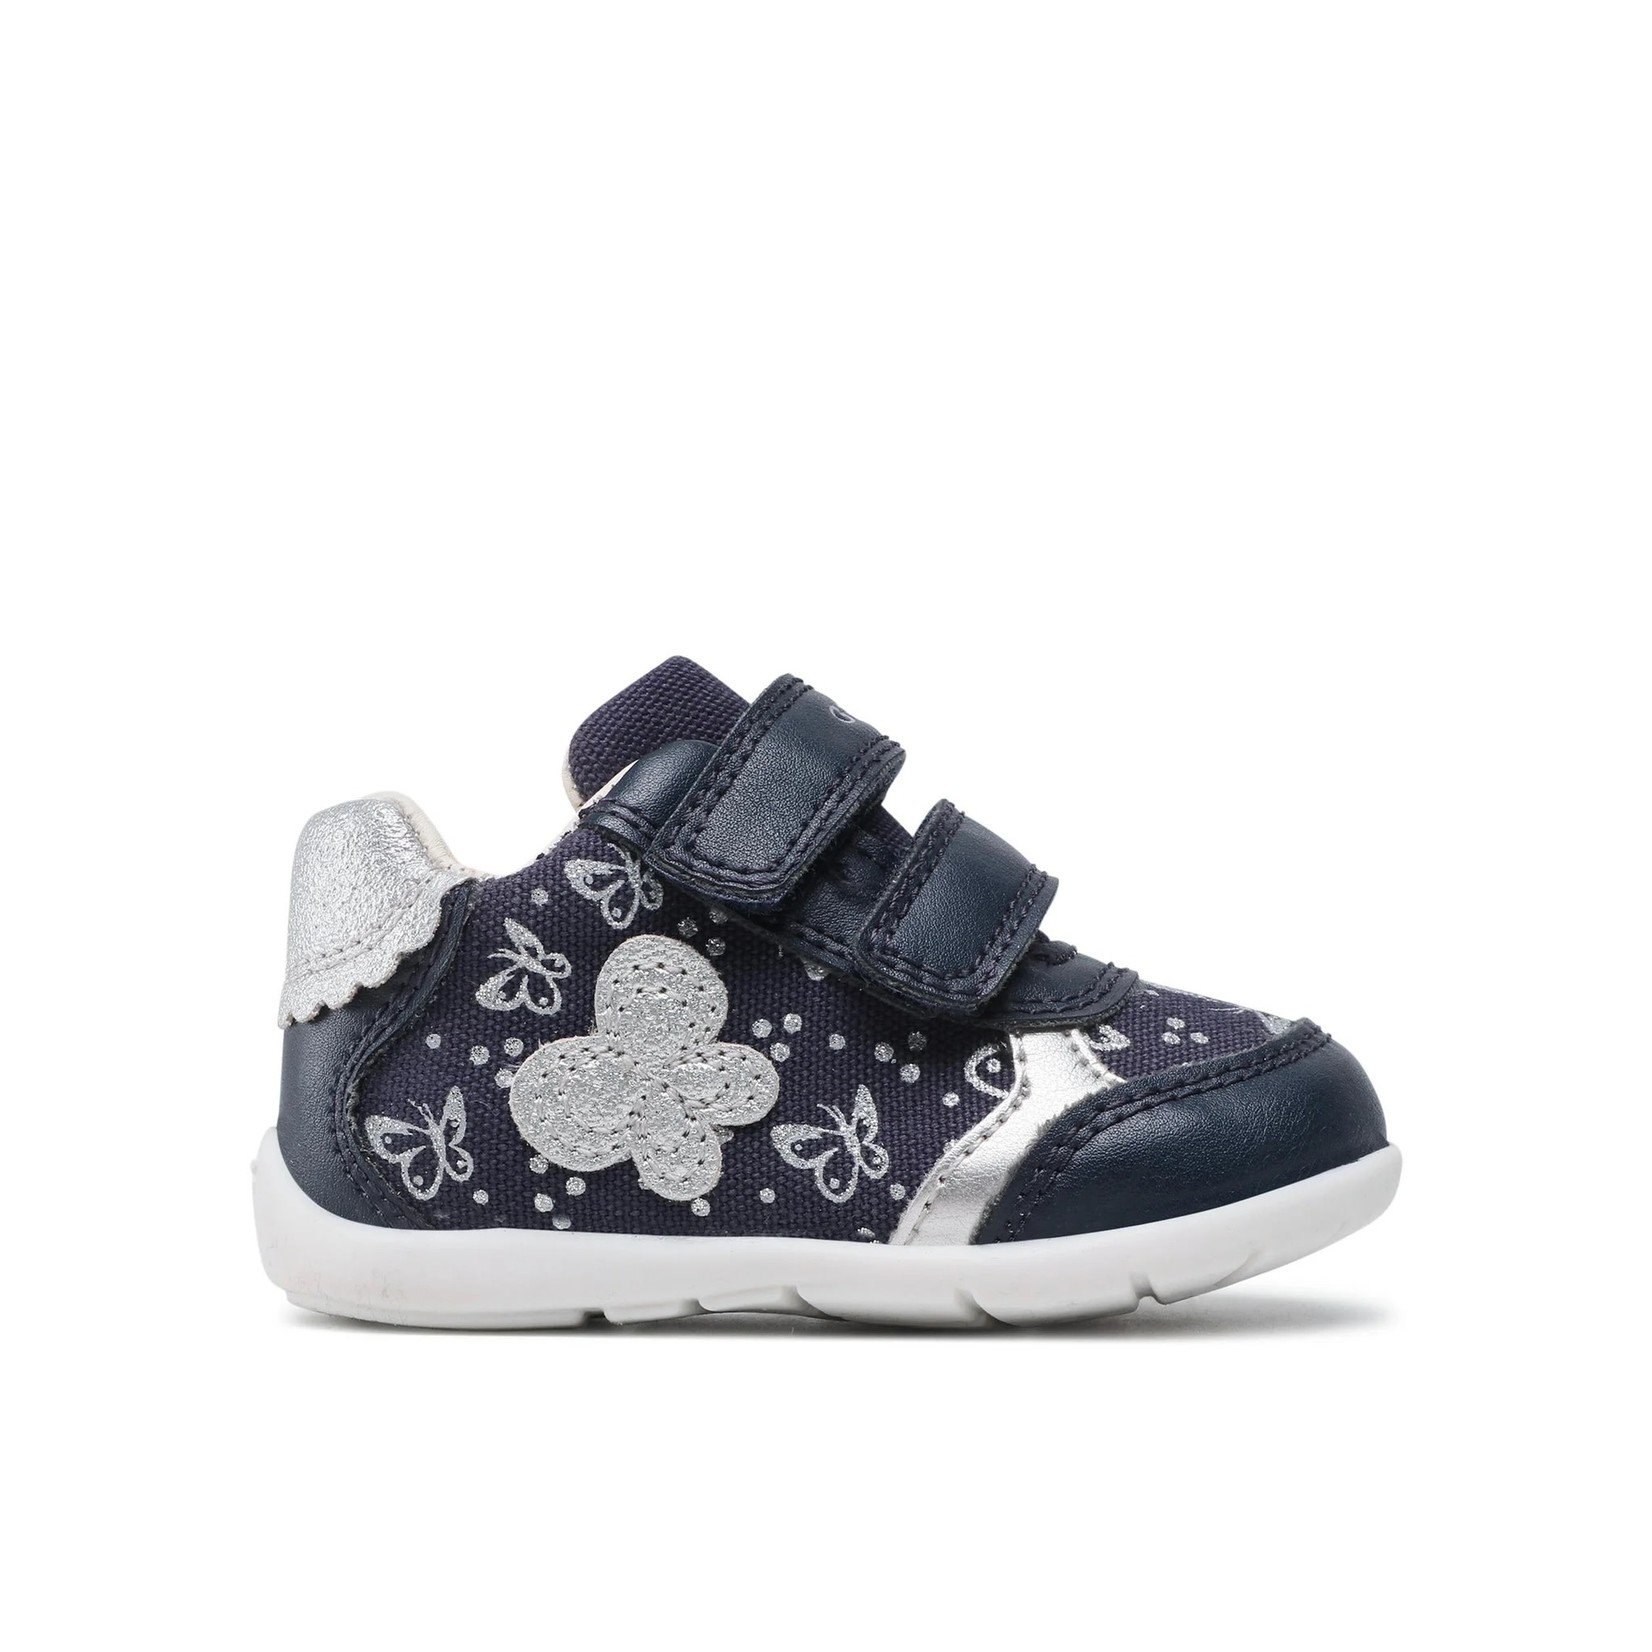 Geox GEOX - Velcro Shoes 'B. Elthan G. A - Navy/Silver'